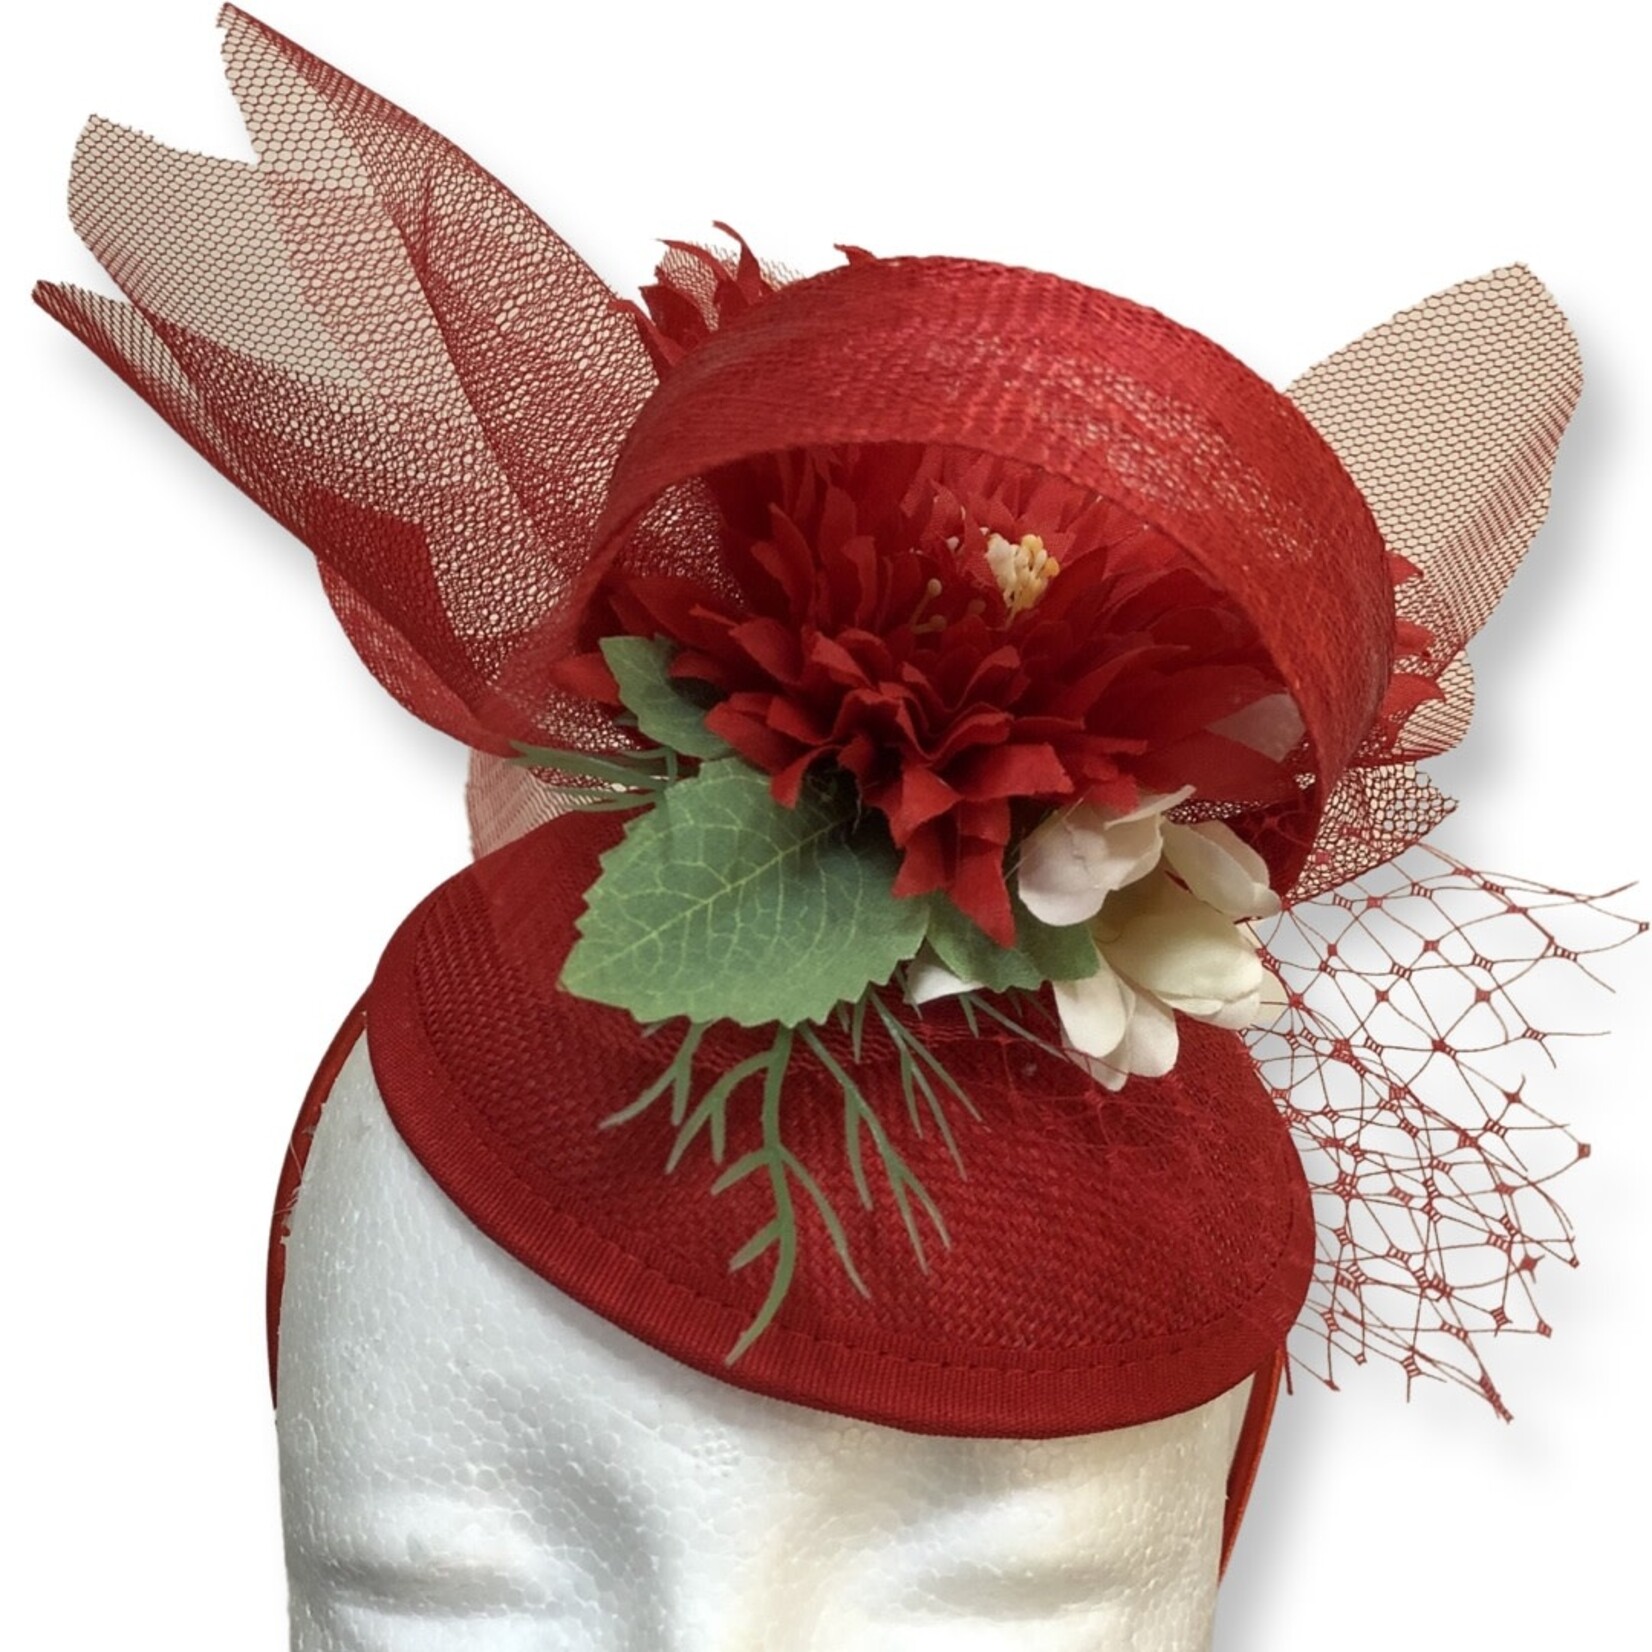 OPO Red & White Floral Hat, Headband Fascinator